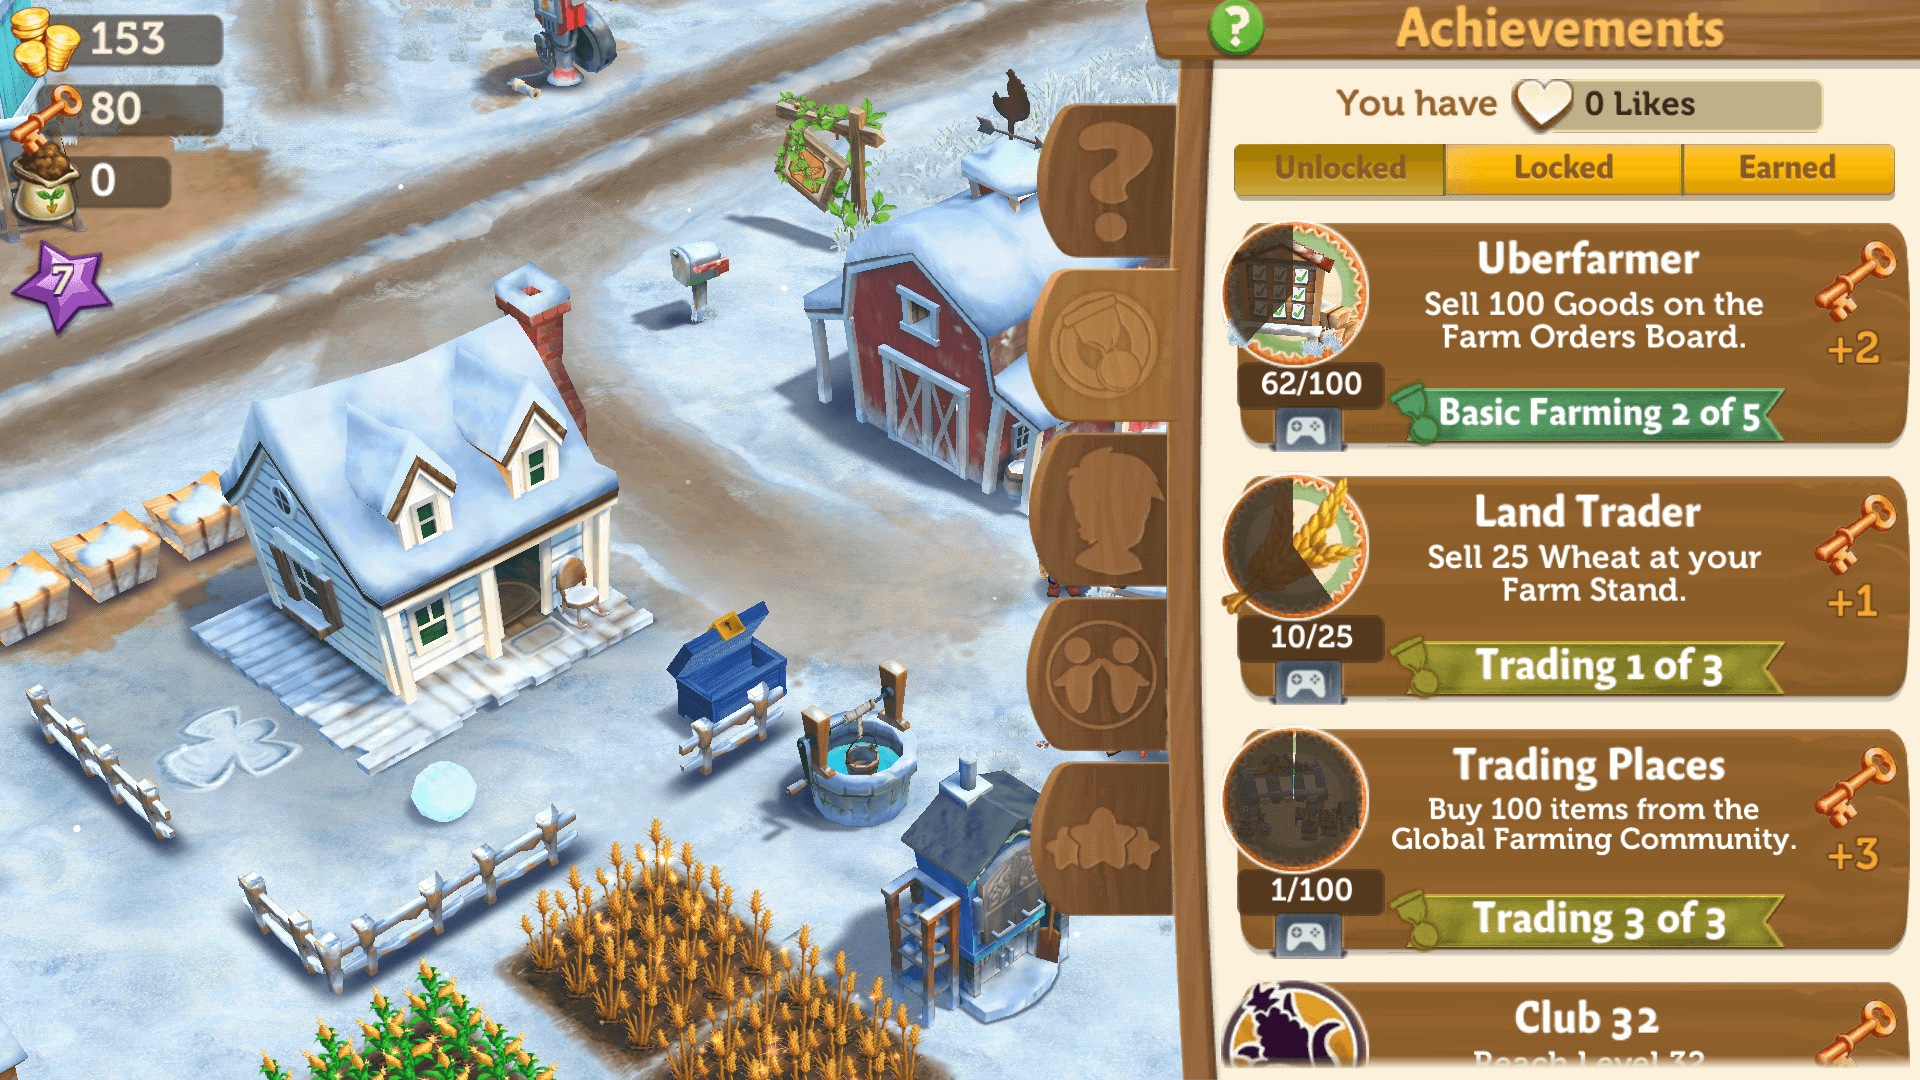 how to use cheat codes in farmville 2 country escape